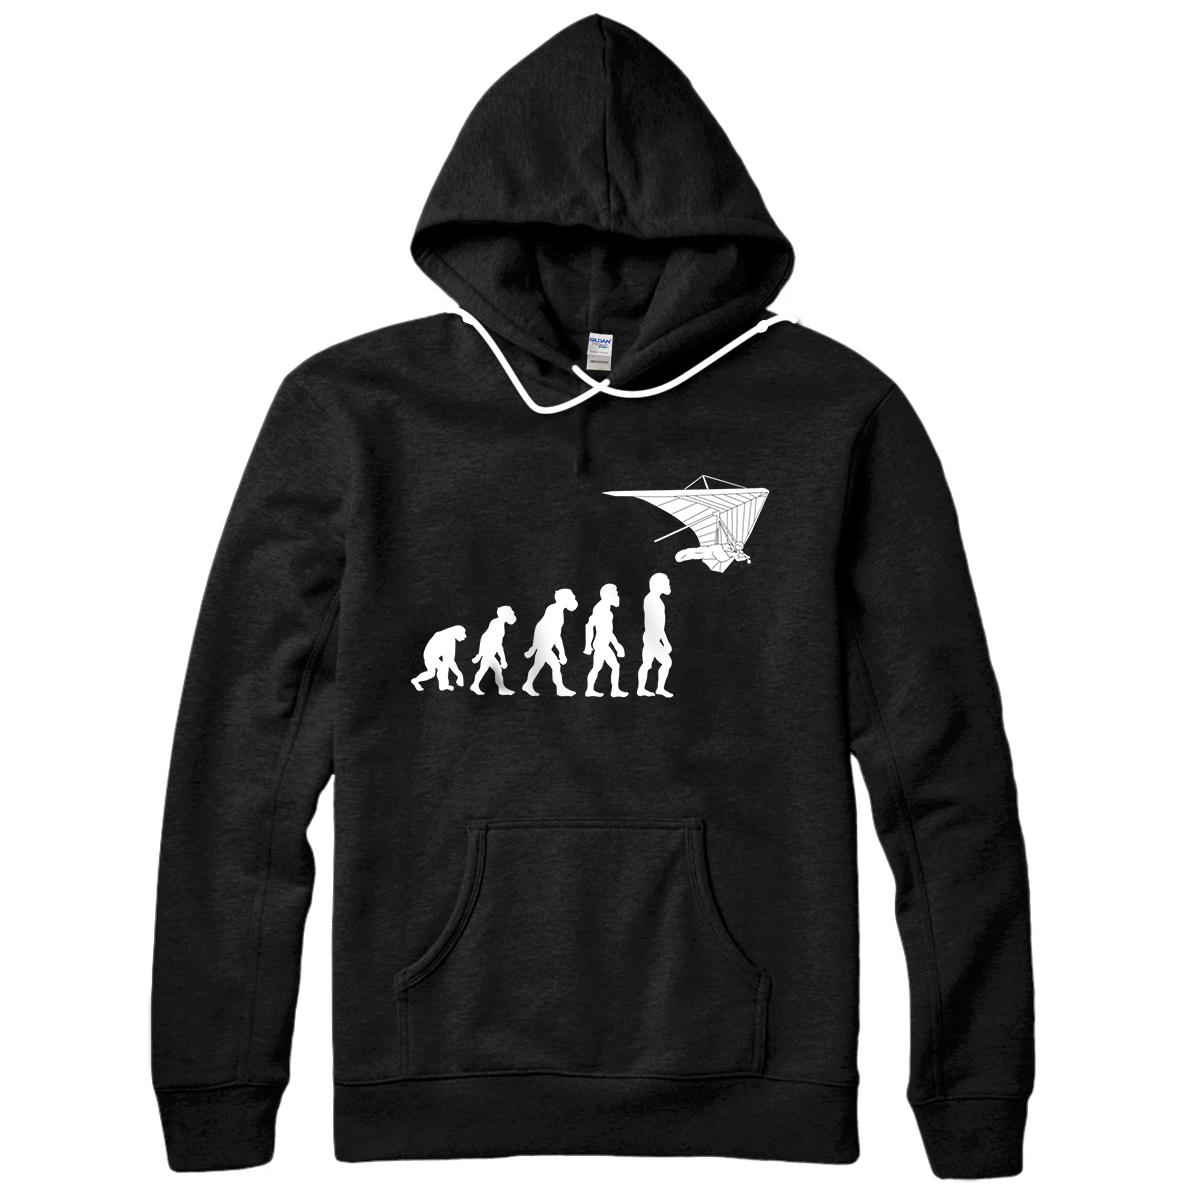 Personalized Funny Human Hang Gliding Pilot Hang Air Flight Glider Pullover Hoodie